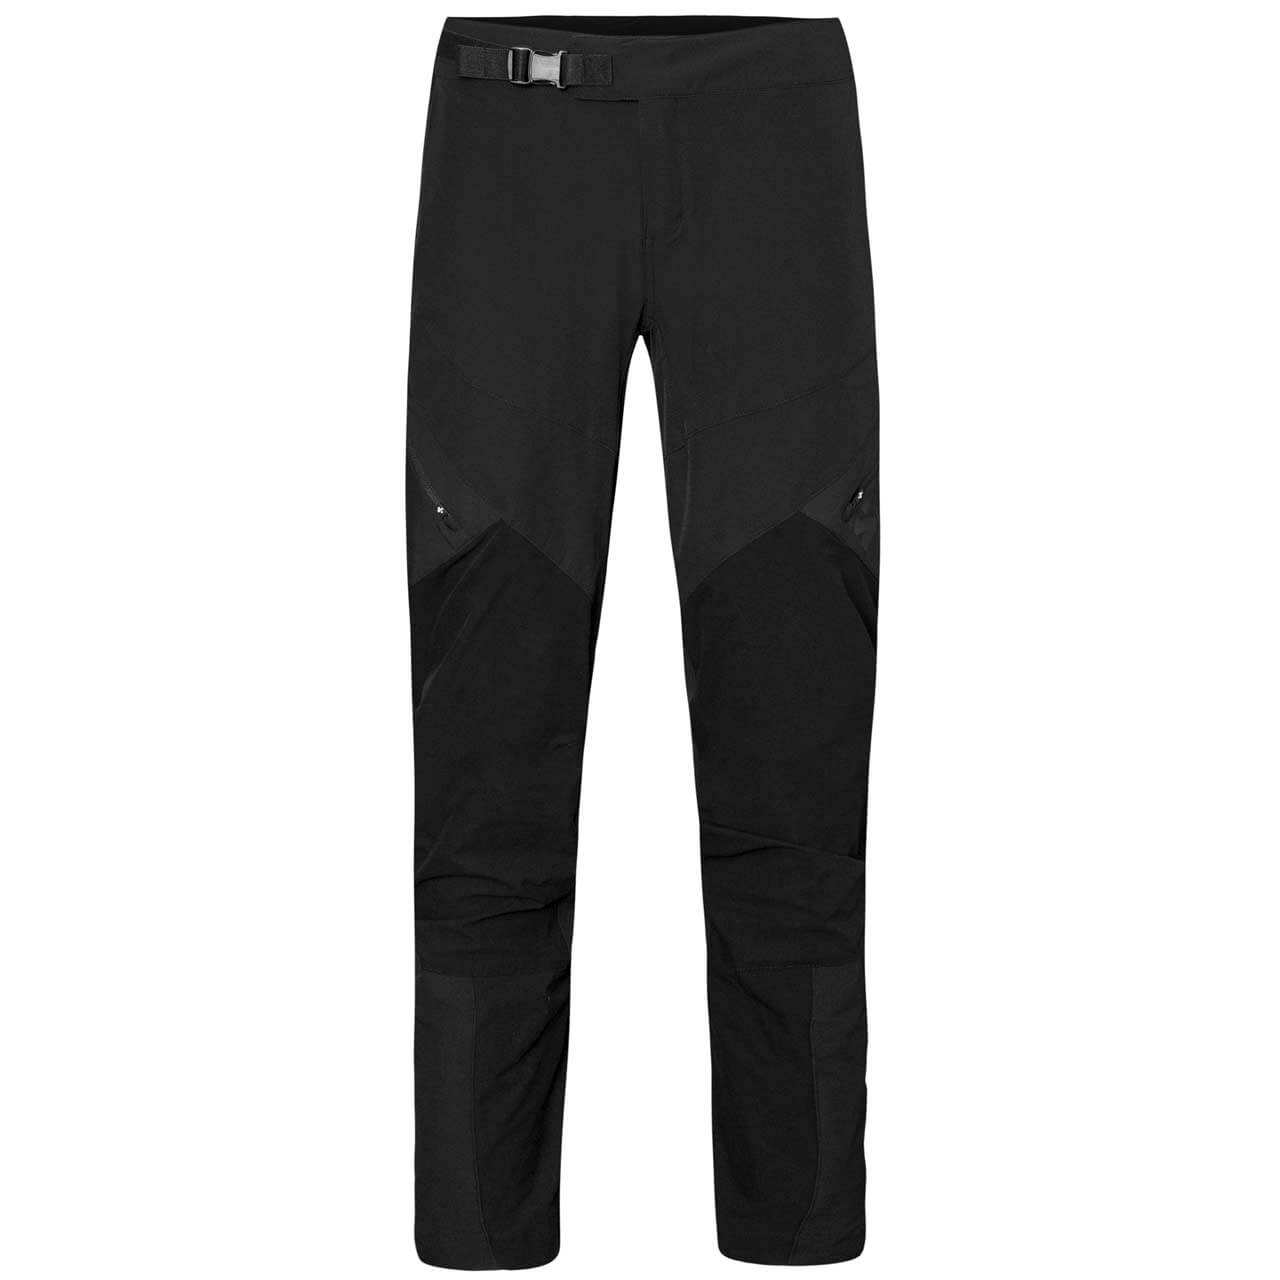 Sweet Protection Hunter Pants - Black, S von Sweet Protection}